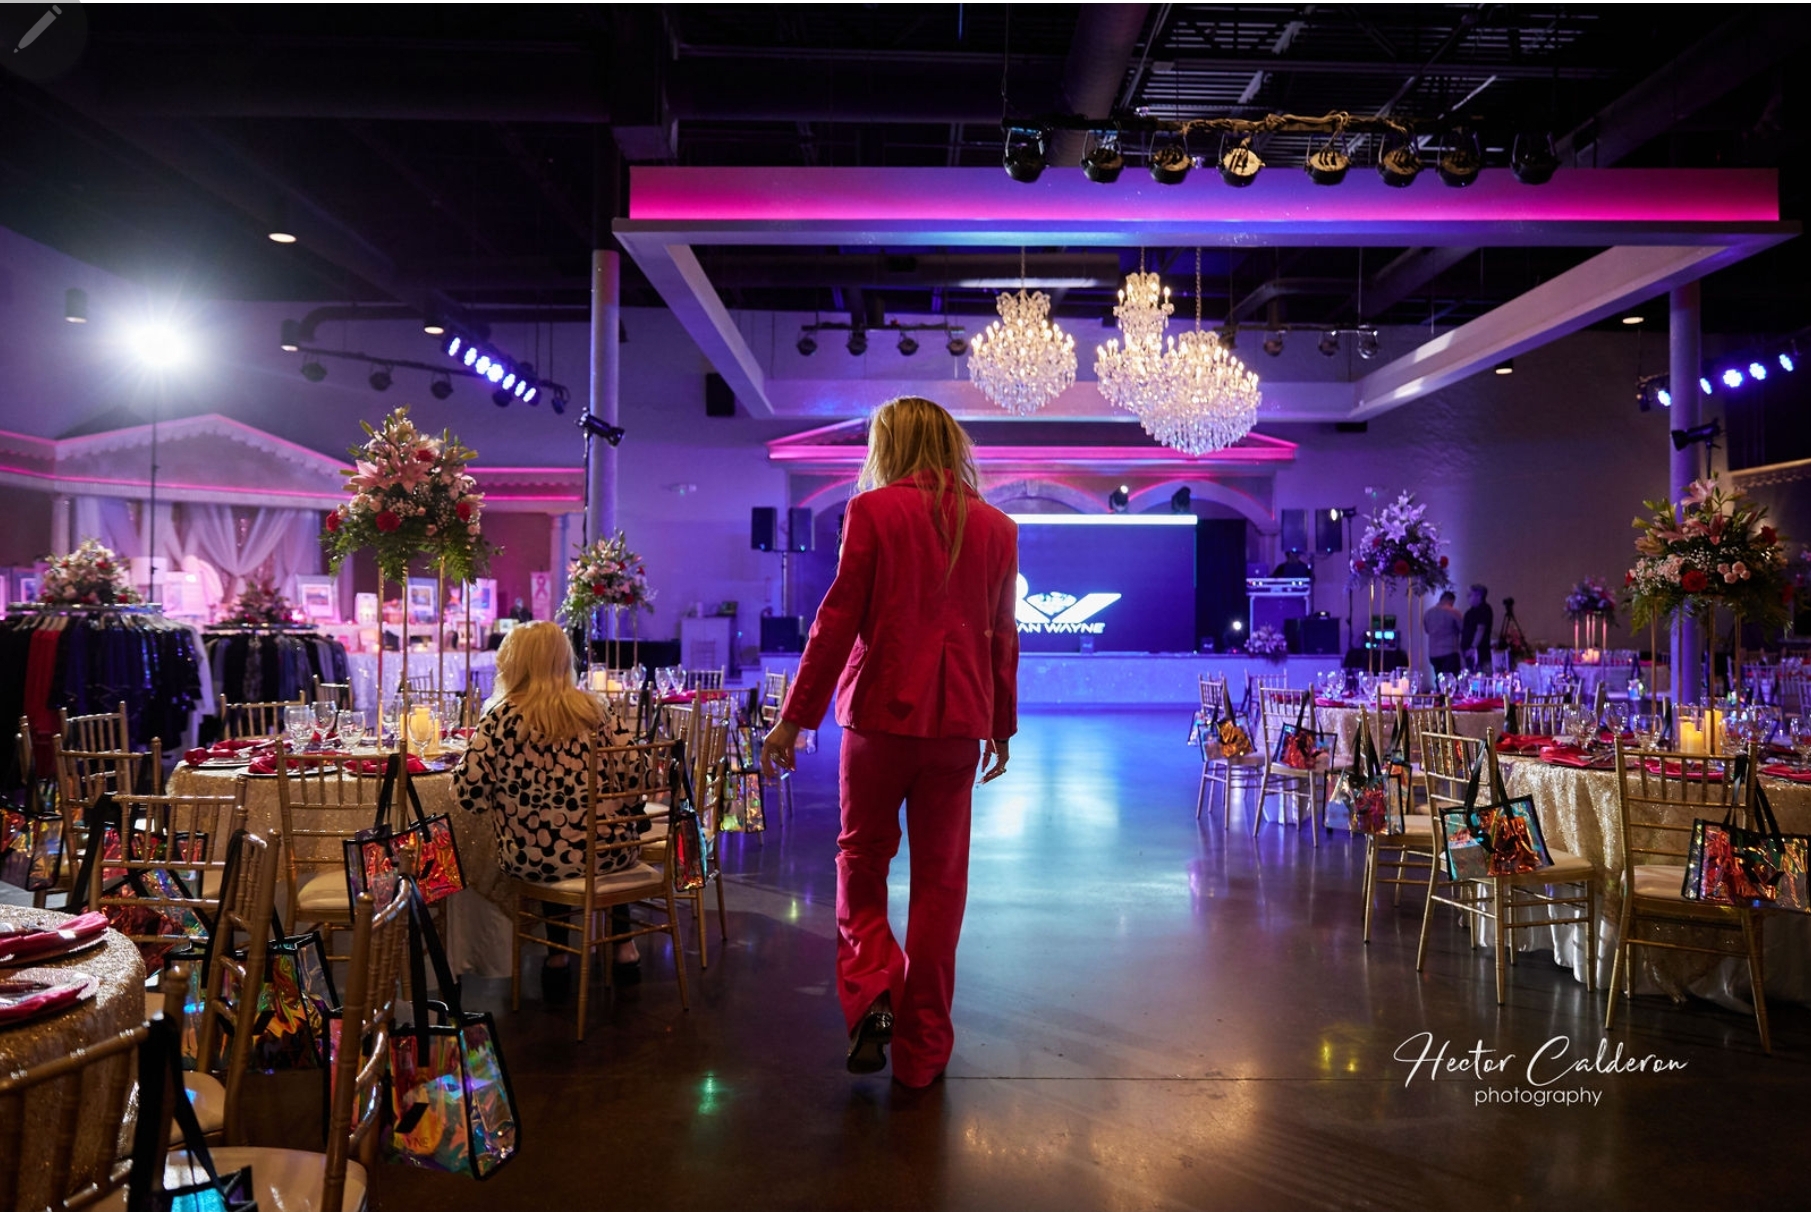 Colorful Ballroom Setting for Fundraiser Event - Kiss Cancer Goodbye by Ryan Wayne Salon The Diva Convention